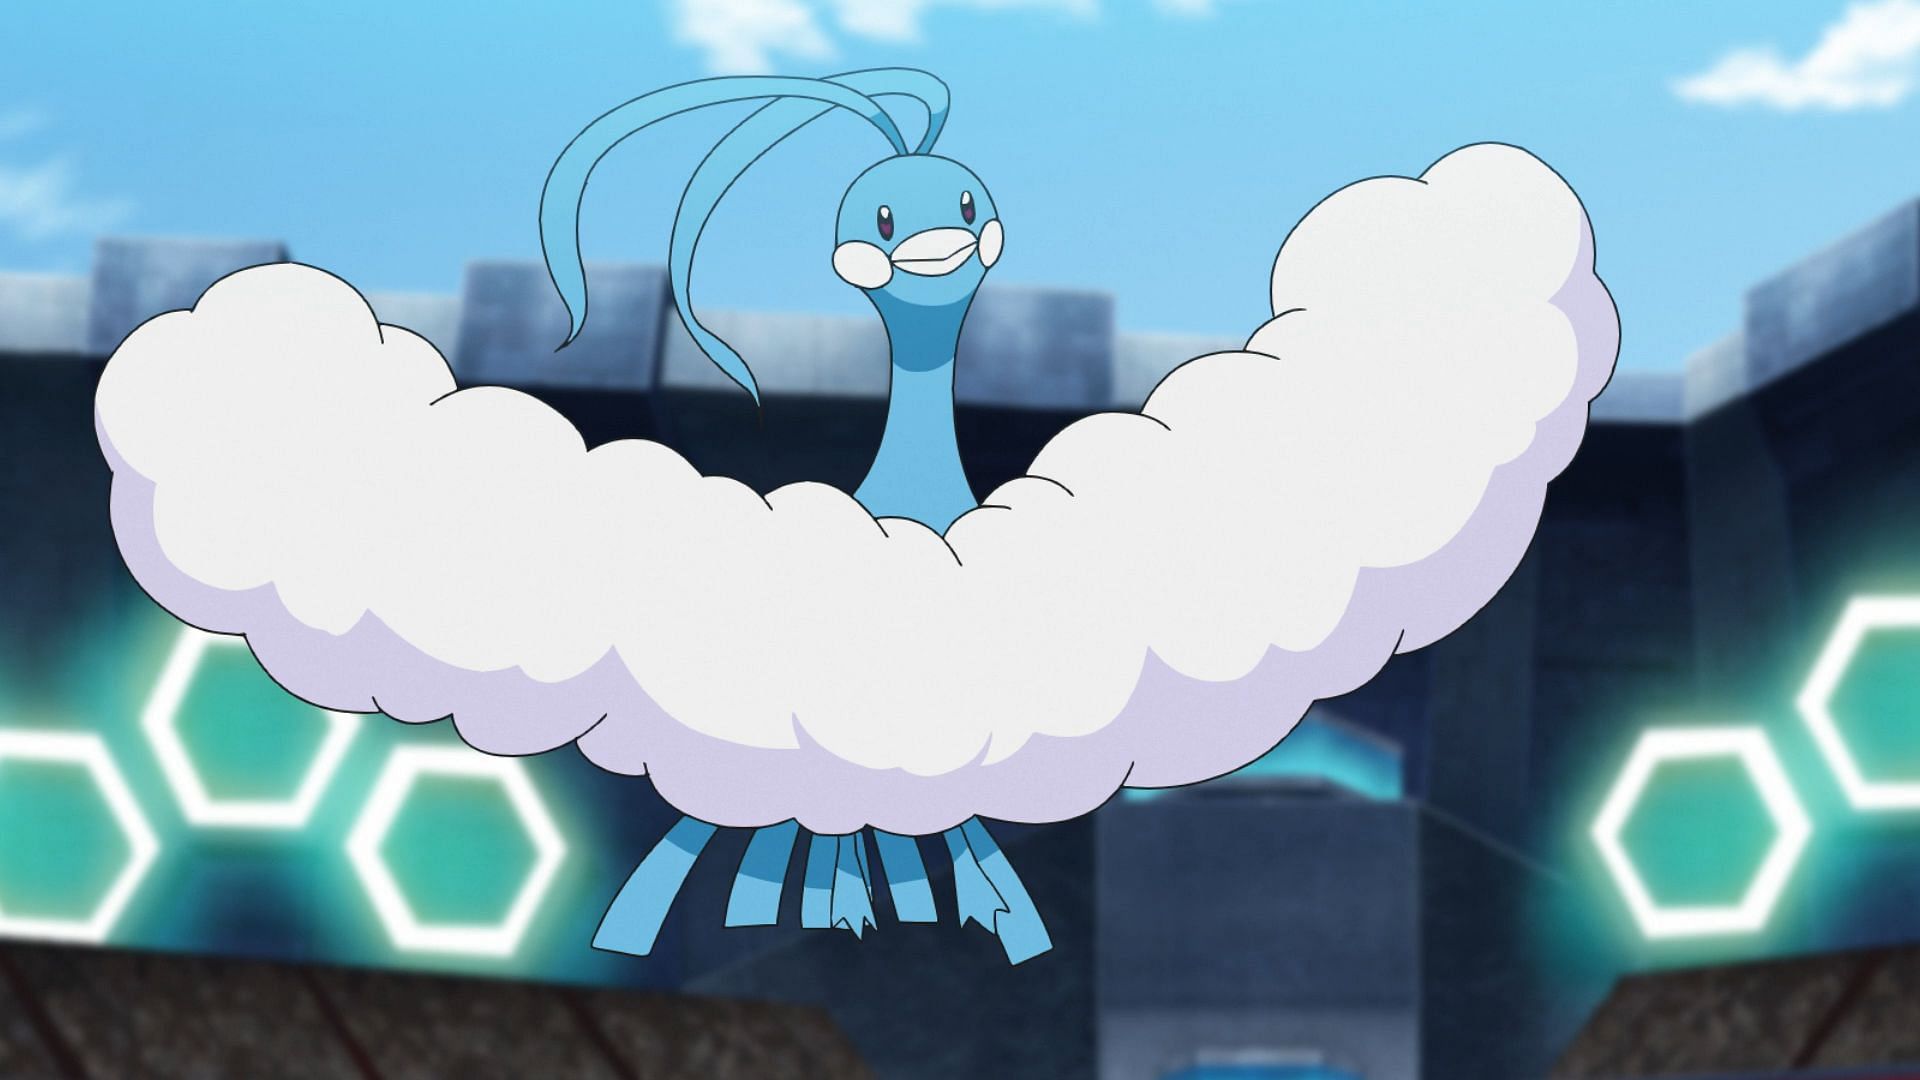 Altaria as it appears in the anime (Image via The Pokemon Company)